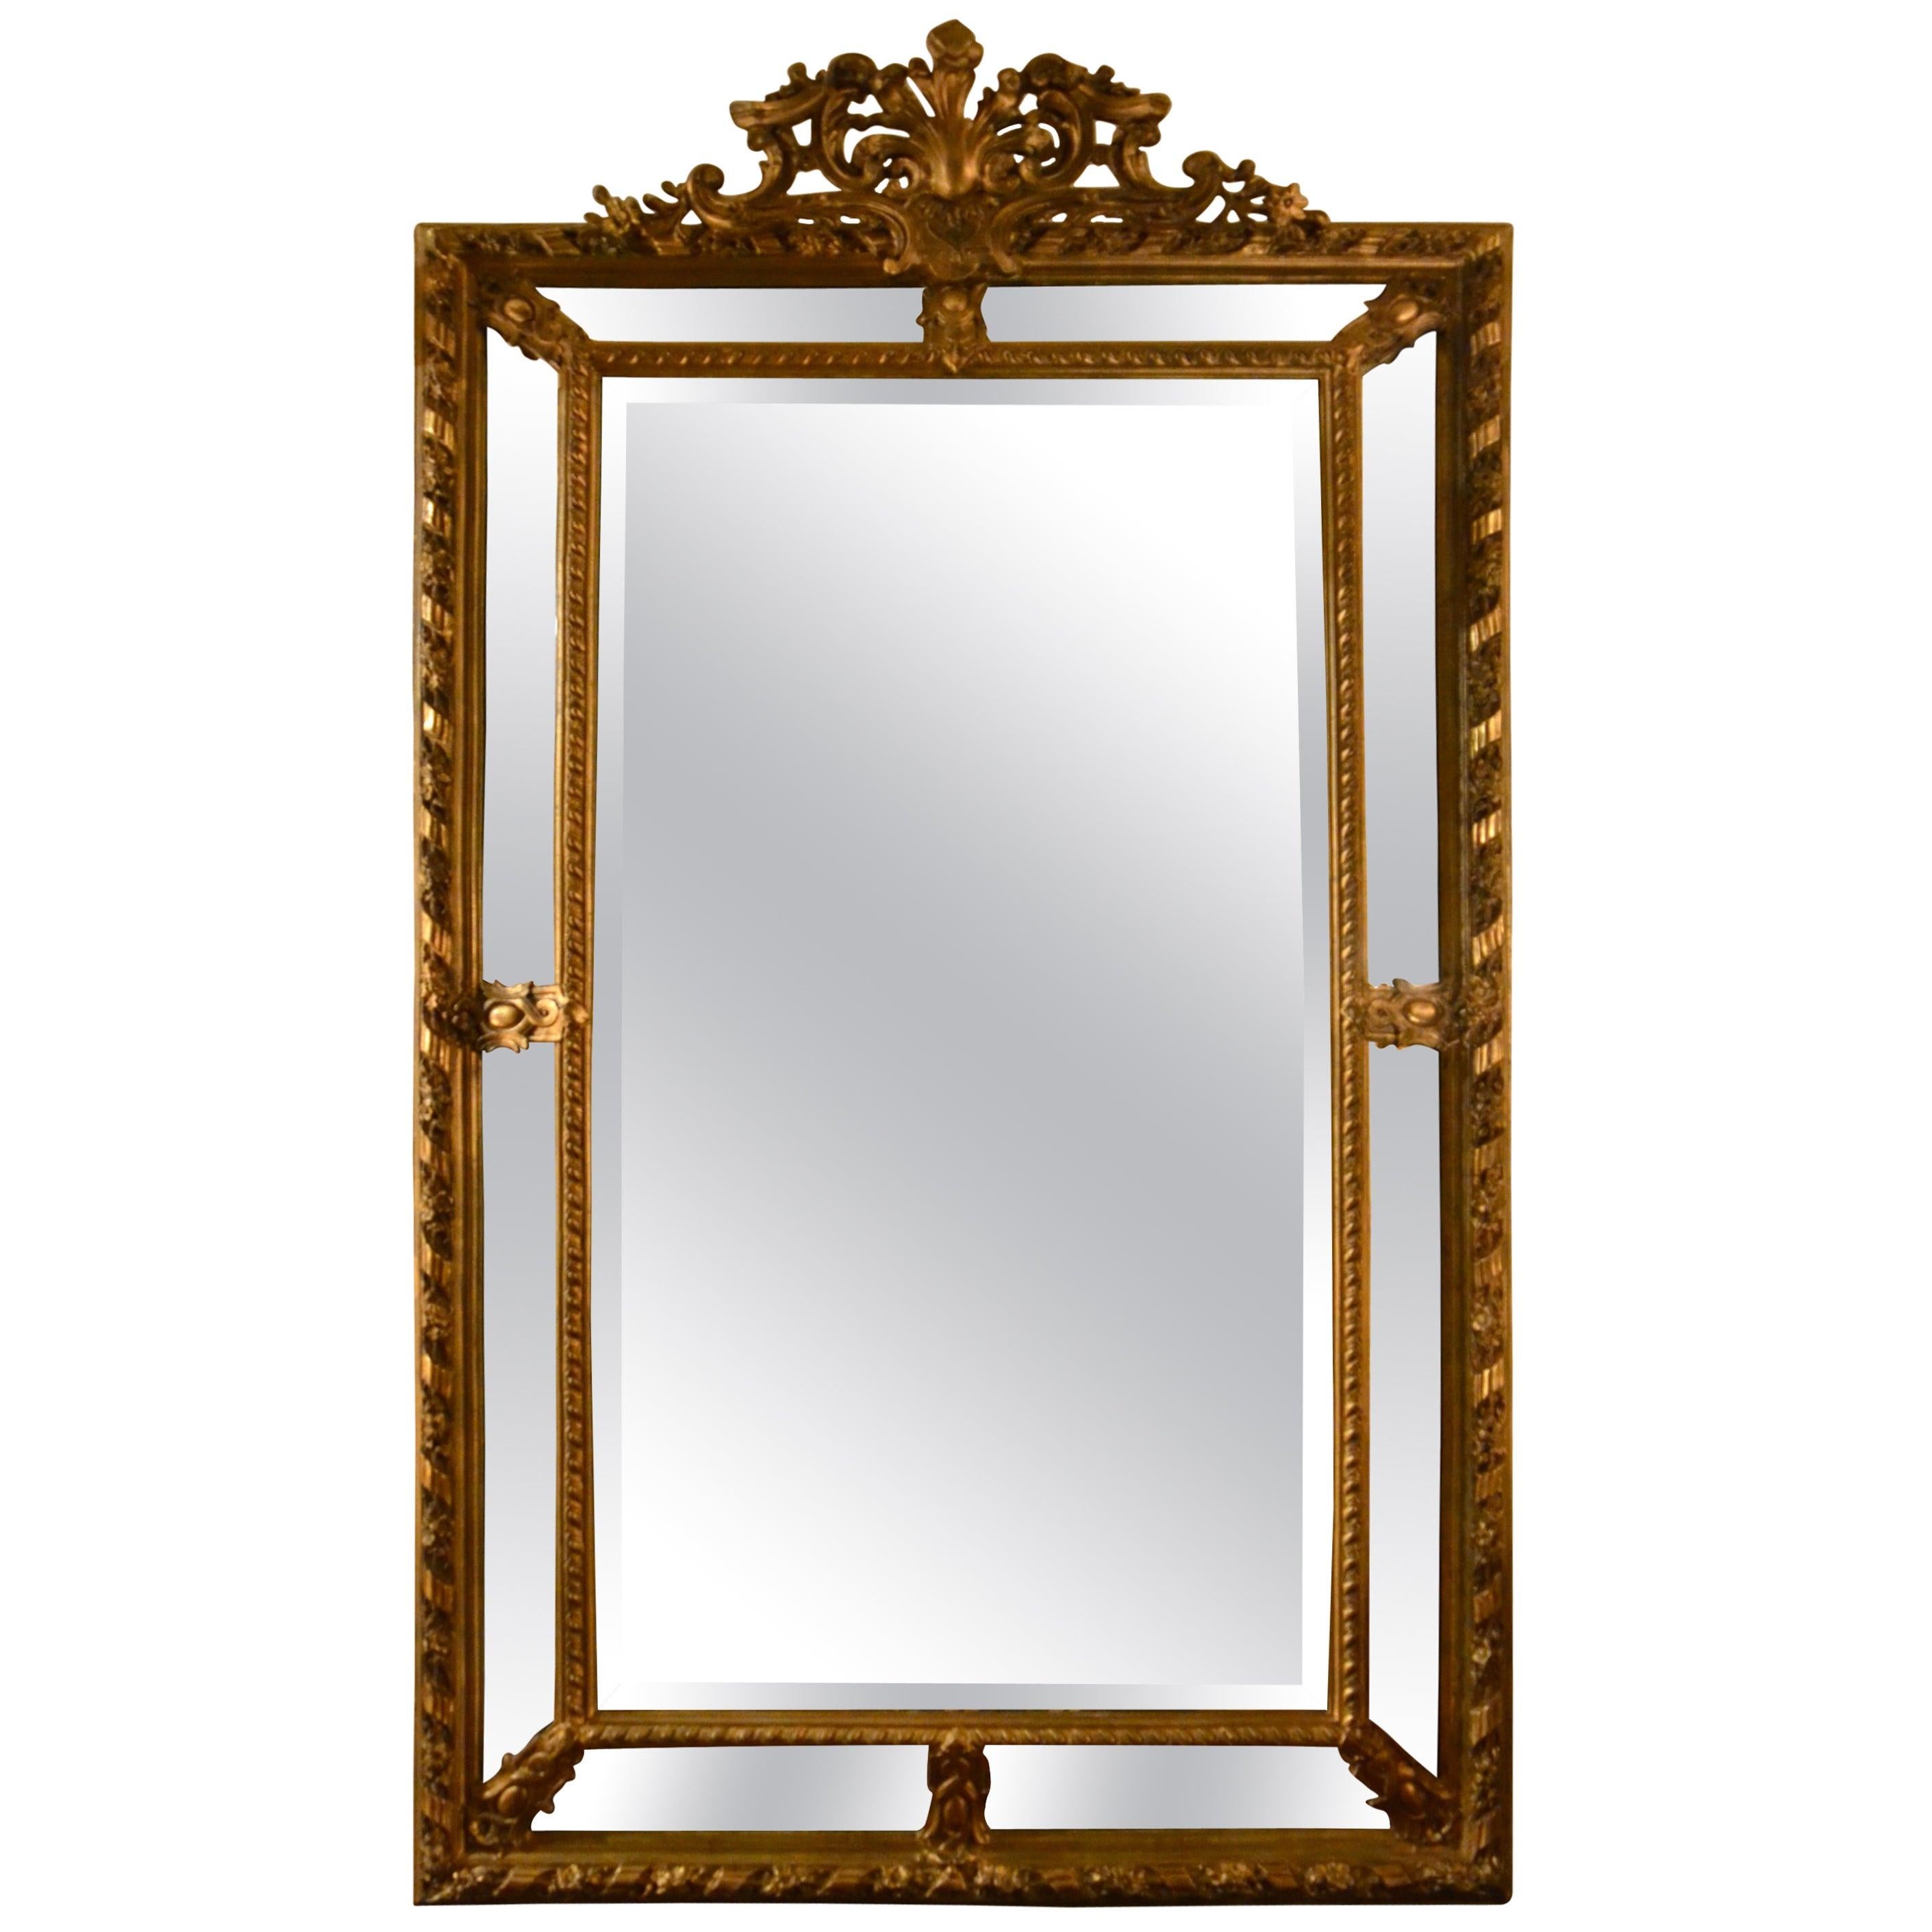 Late 19th Century Antique French Louis XVI Style Gold Color Carved Wood Panelled Mirror circa 1890